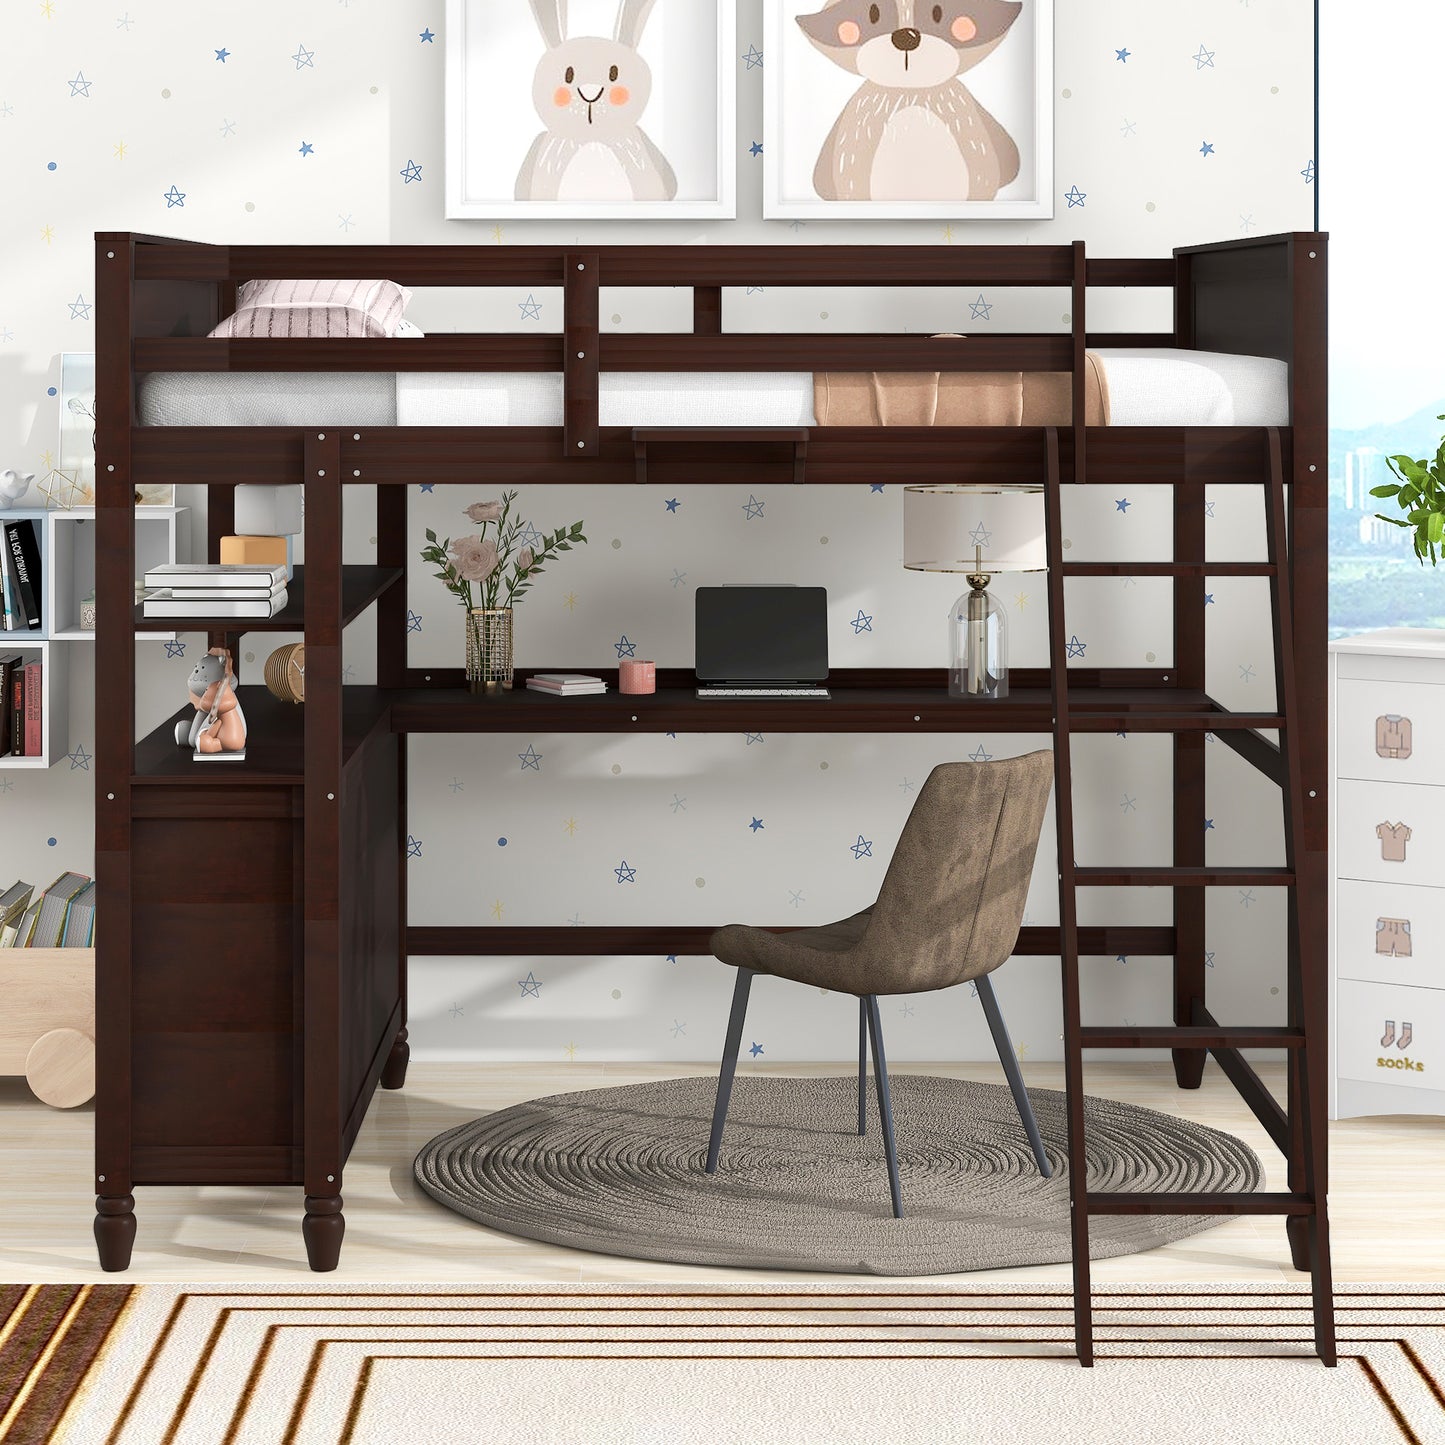 Full size Loft Bed with Drawers and Desk, Wooden Loft Bed with Shelves - Espresso